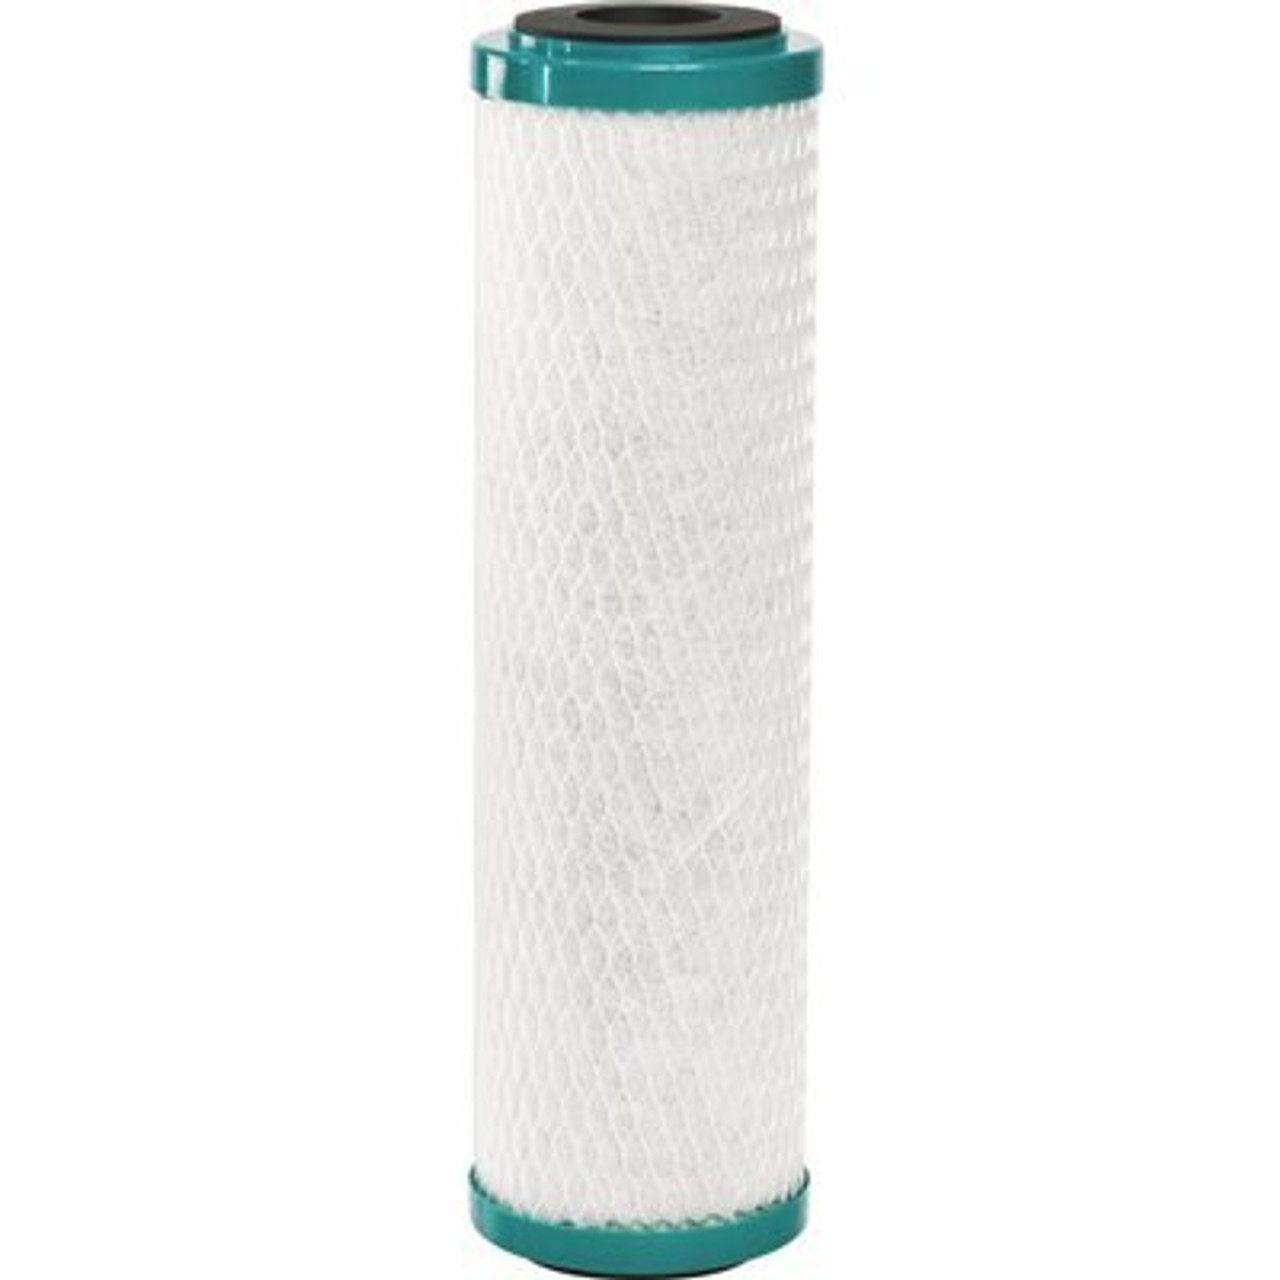 Ge Universal Single Stage Replacement Water Filter Cartridge - 3553760